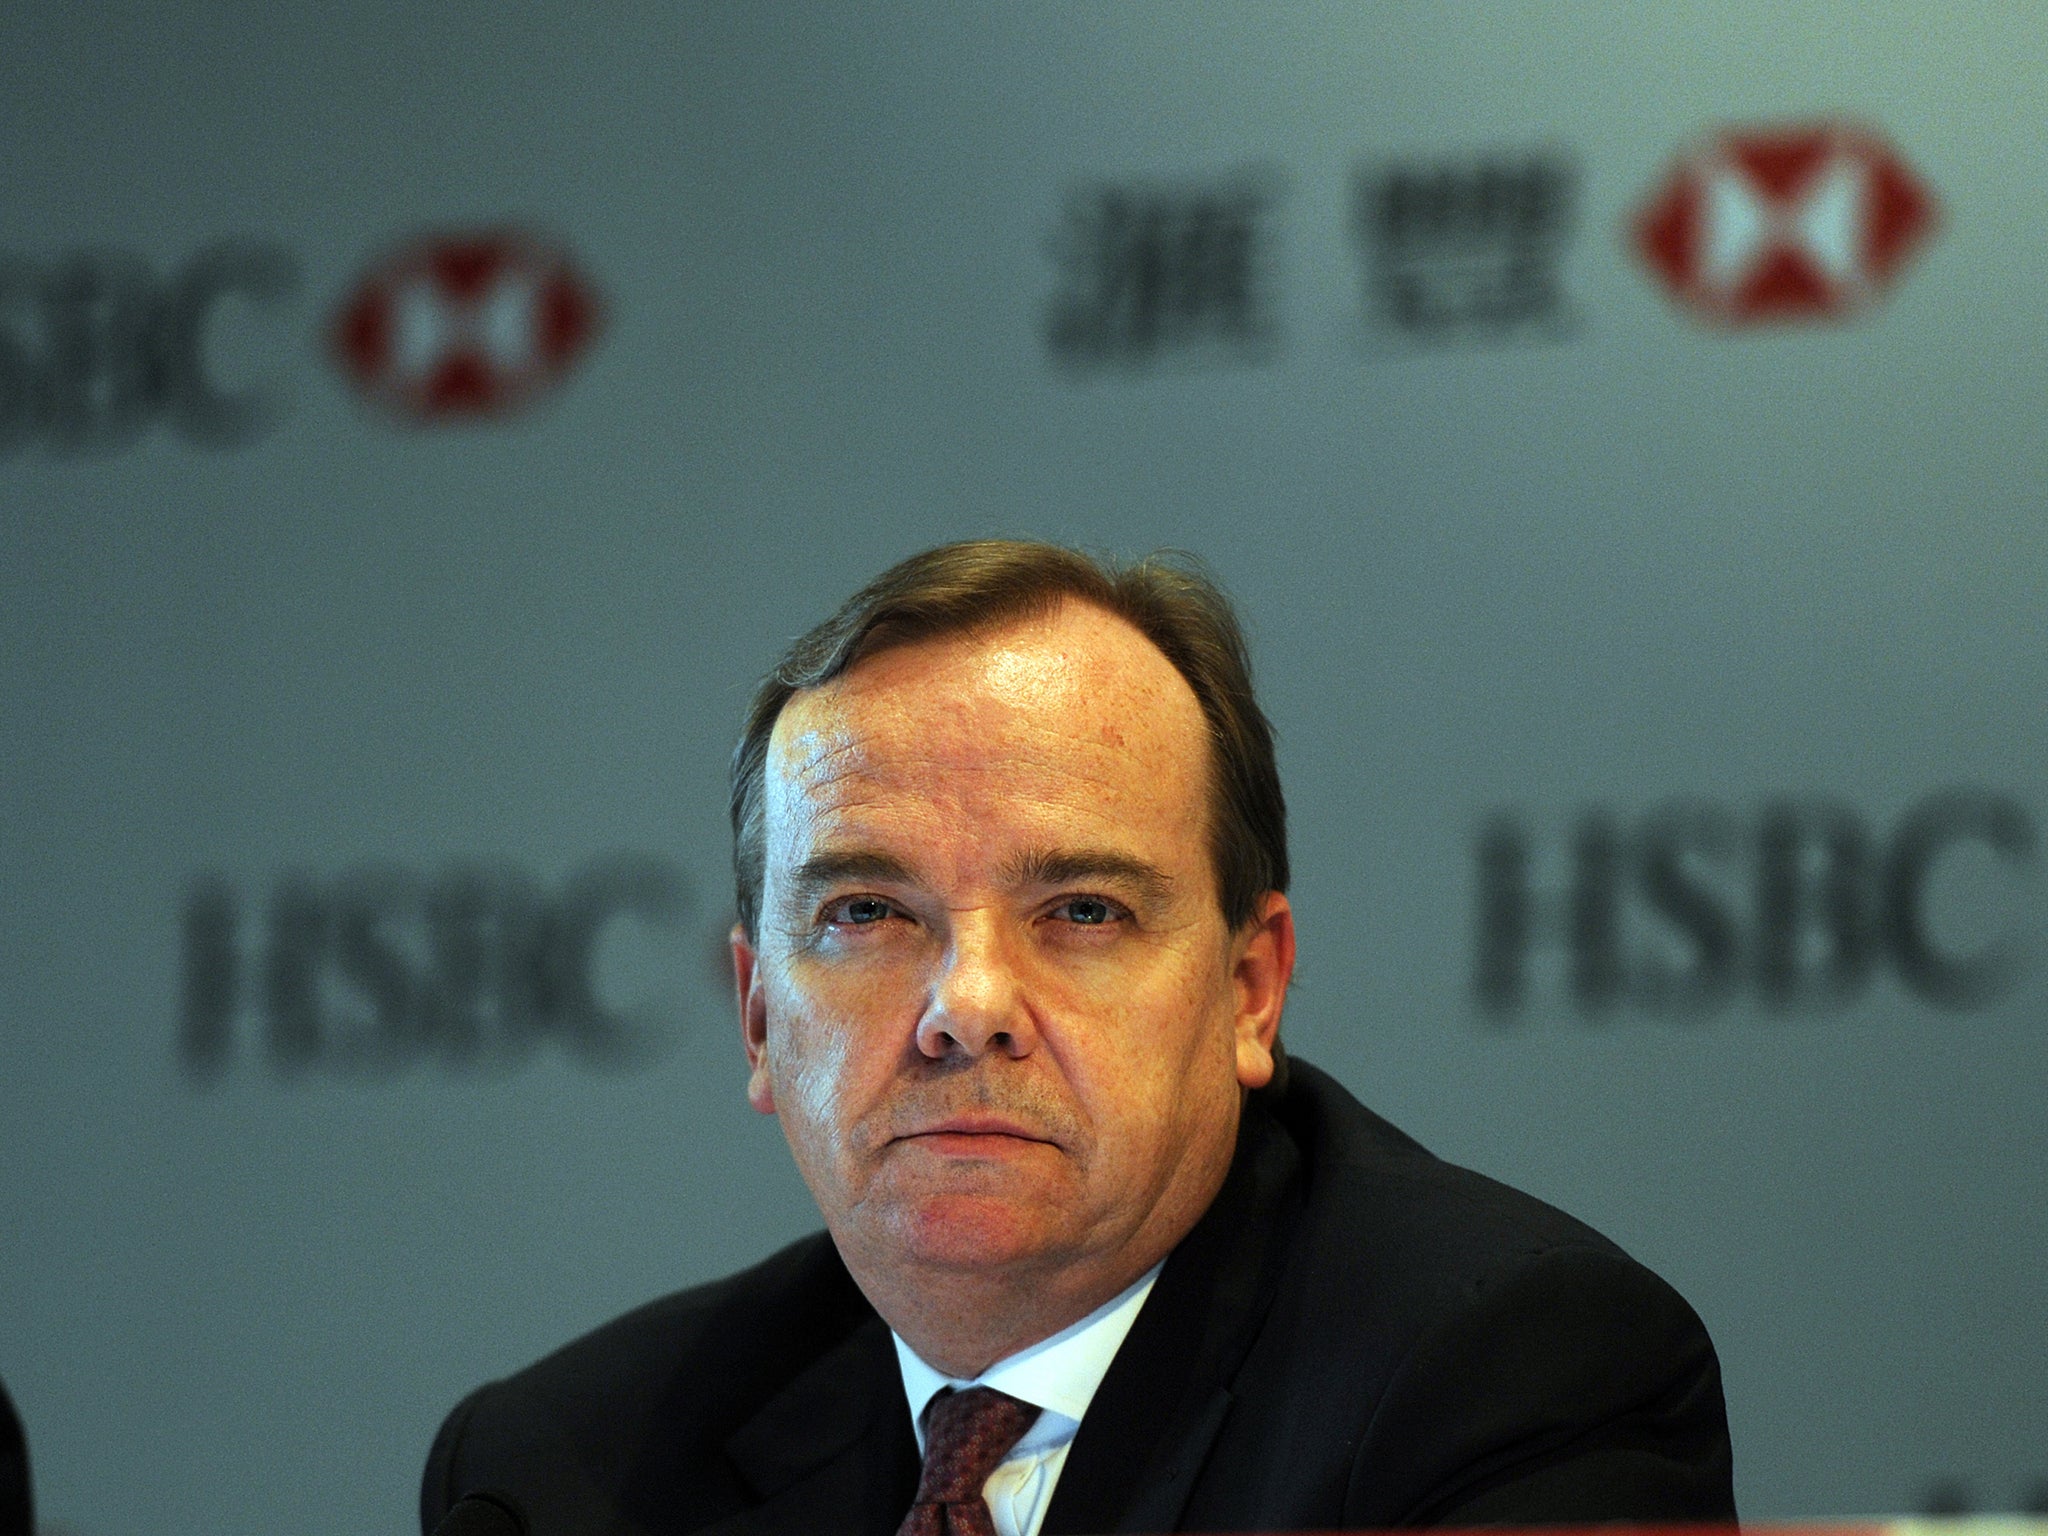 HSBC's chief executive, Stuart Gulliver, had insisted he had always paid full UK tax on all his earnings (Getty)